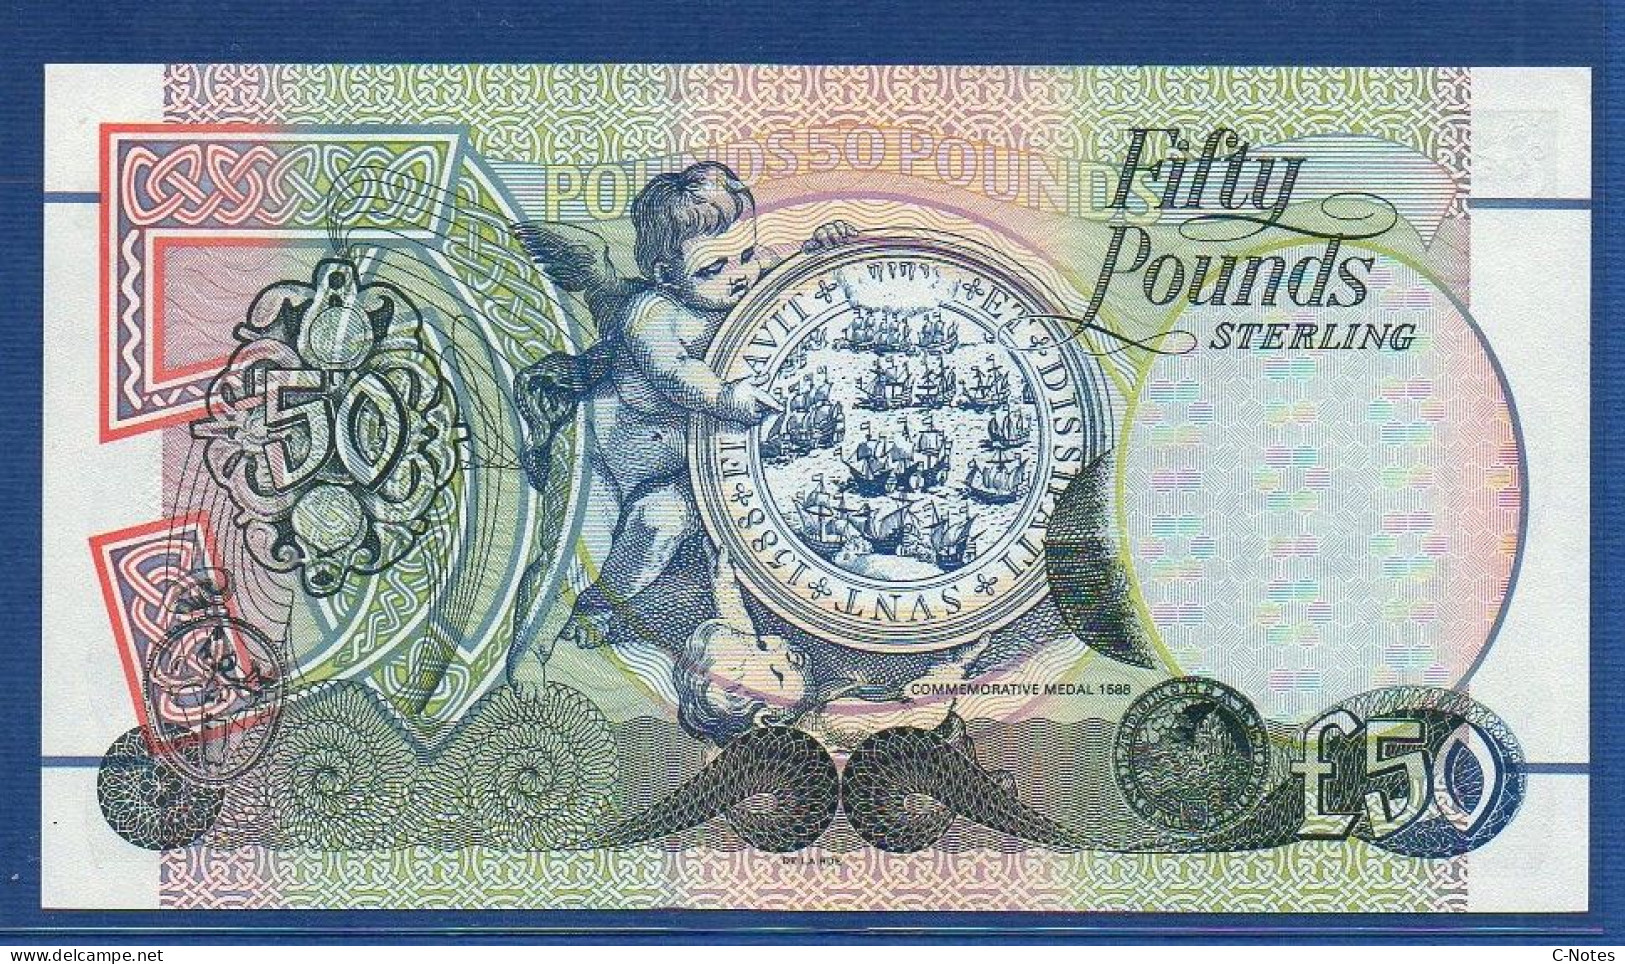 NORTHERN IRELAND - P.138b – 50 POUNDS 2009 UNC, S/n CA023164 First Trust Bank - 50 Pond